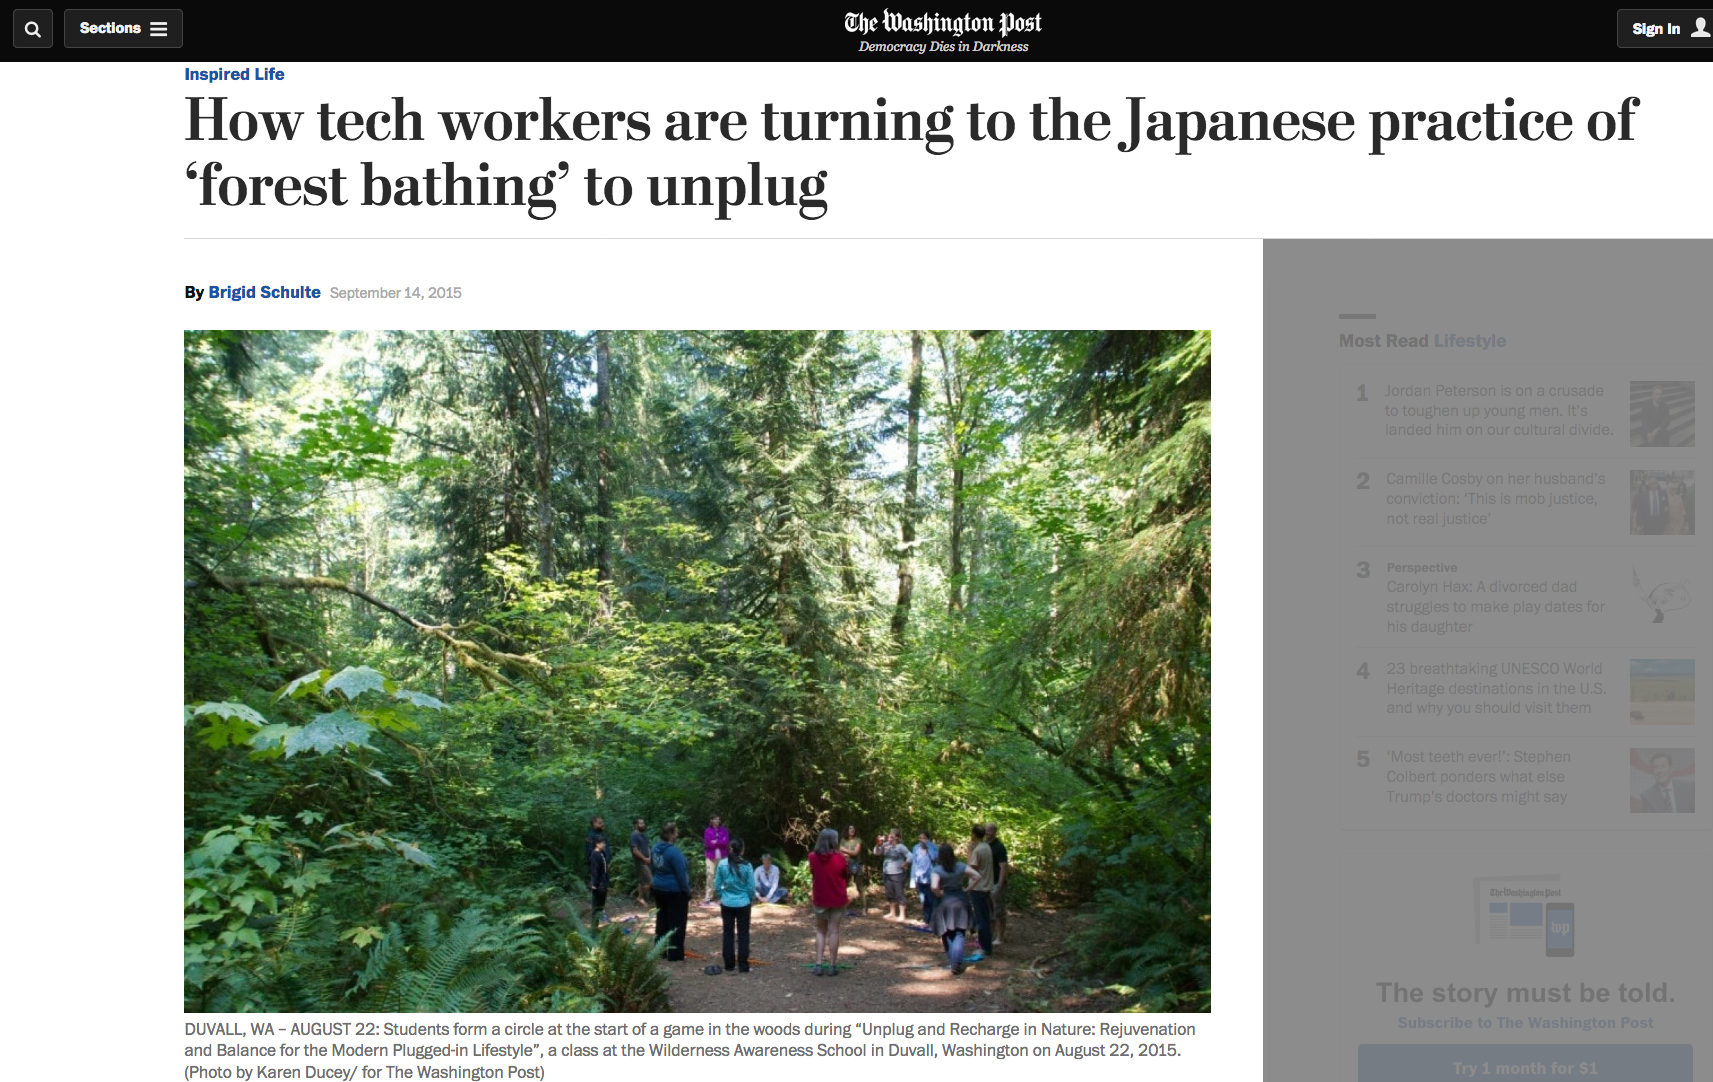 How tech workers are turning to the Japanese practice of ‘forest bathing’ to unplug   for the Washington Post, September 14, 2015.